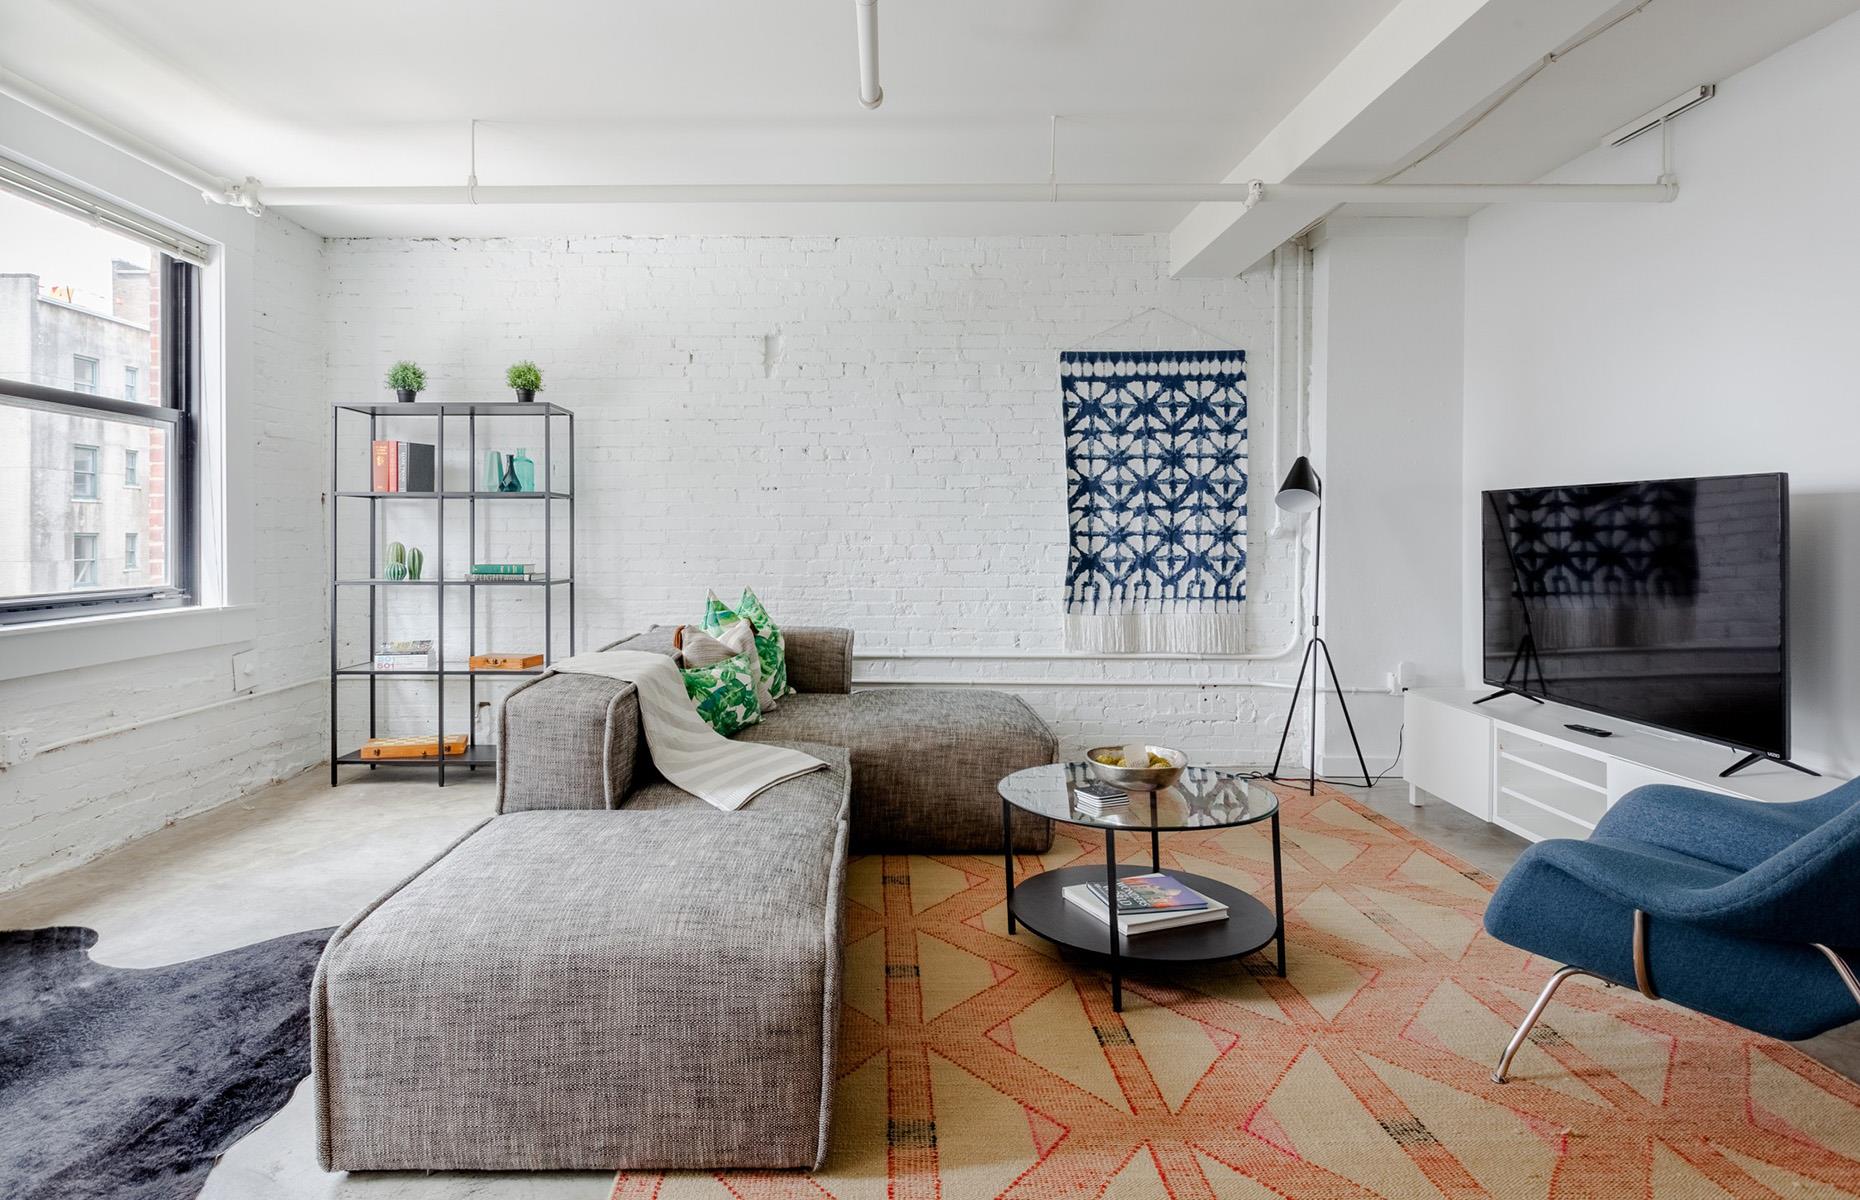 <p>Centrally located in downtown St Louis, <a href="https://www.airbnb.co.uk/rooms/plus/20933383">this stunning penthouse</a> loft features an open layout, large windows letting in plenty of light and a very modern and minimalist design with exposed brick walls and colorful accents adding a final flourish. The one-bedroom home is available to book from $60 a night and has a full kitchen, bathroom and an open-plan living and dining area. It's worth noting that the marble tulip kitchen table was designed by the same people who worked on the famous St Louis Arch. Love this? Now check out <a href="https://www.loveexploring.com/gallerylist/73091/the-most-stunning-airbnb-in-every-state-and-dc-2020">the most beautiful Airbnb in every state and DC</a>.</p>